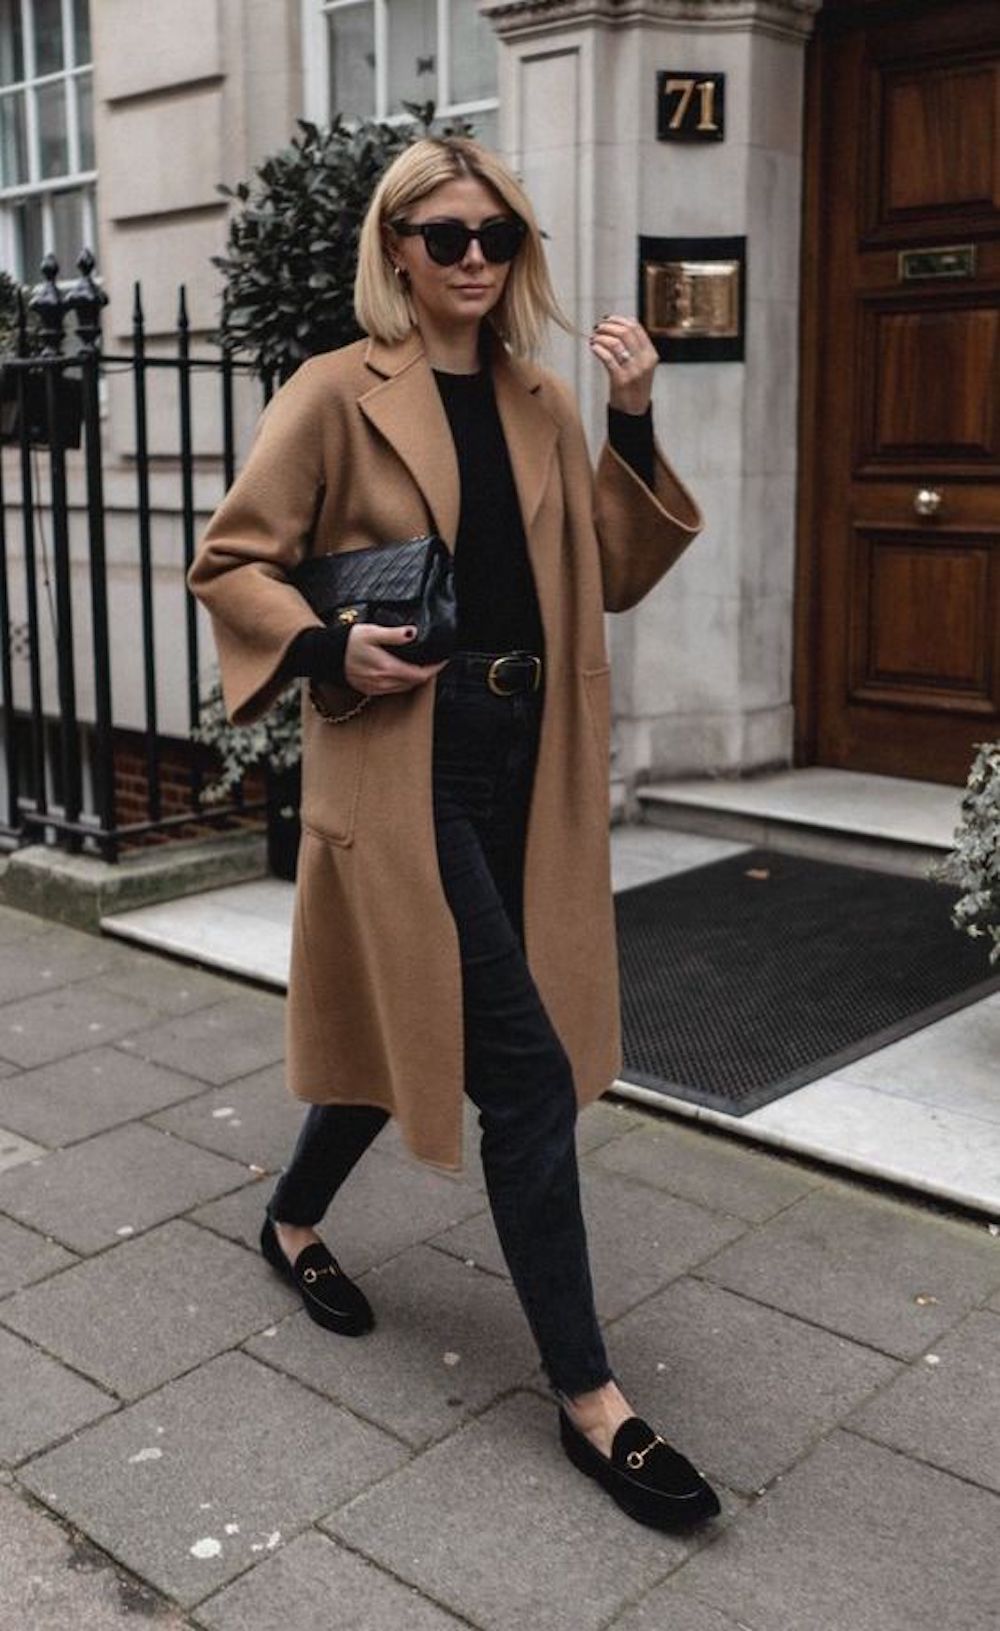 image of a woman walking down the road in a camel coat, black sweater, and black pants